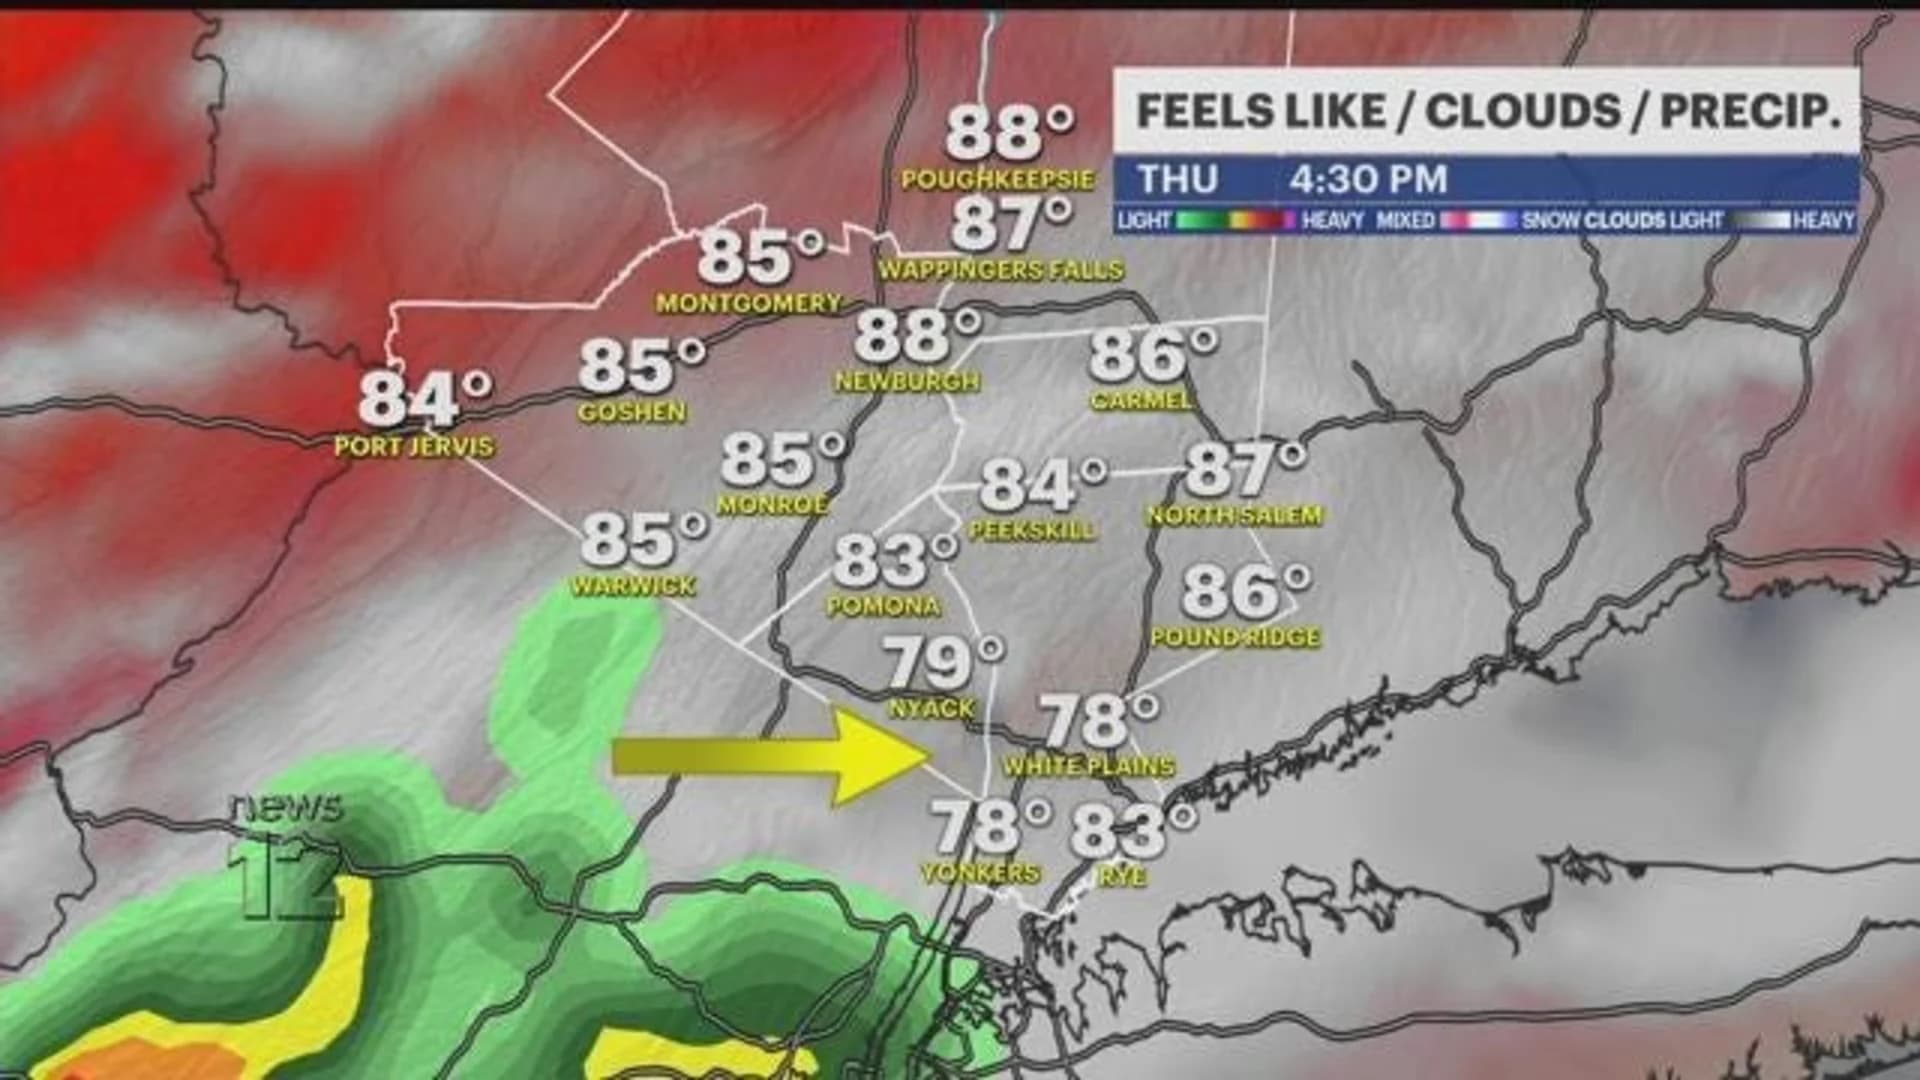 Some relief from heat and humidity, pop-up storms still possible